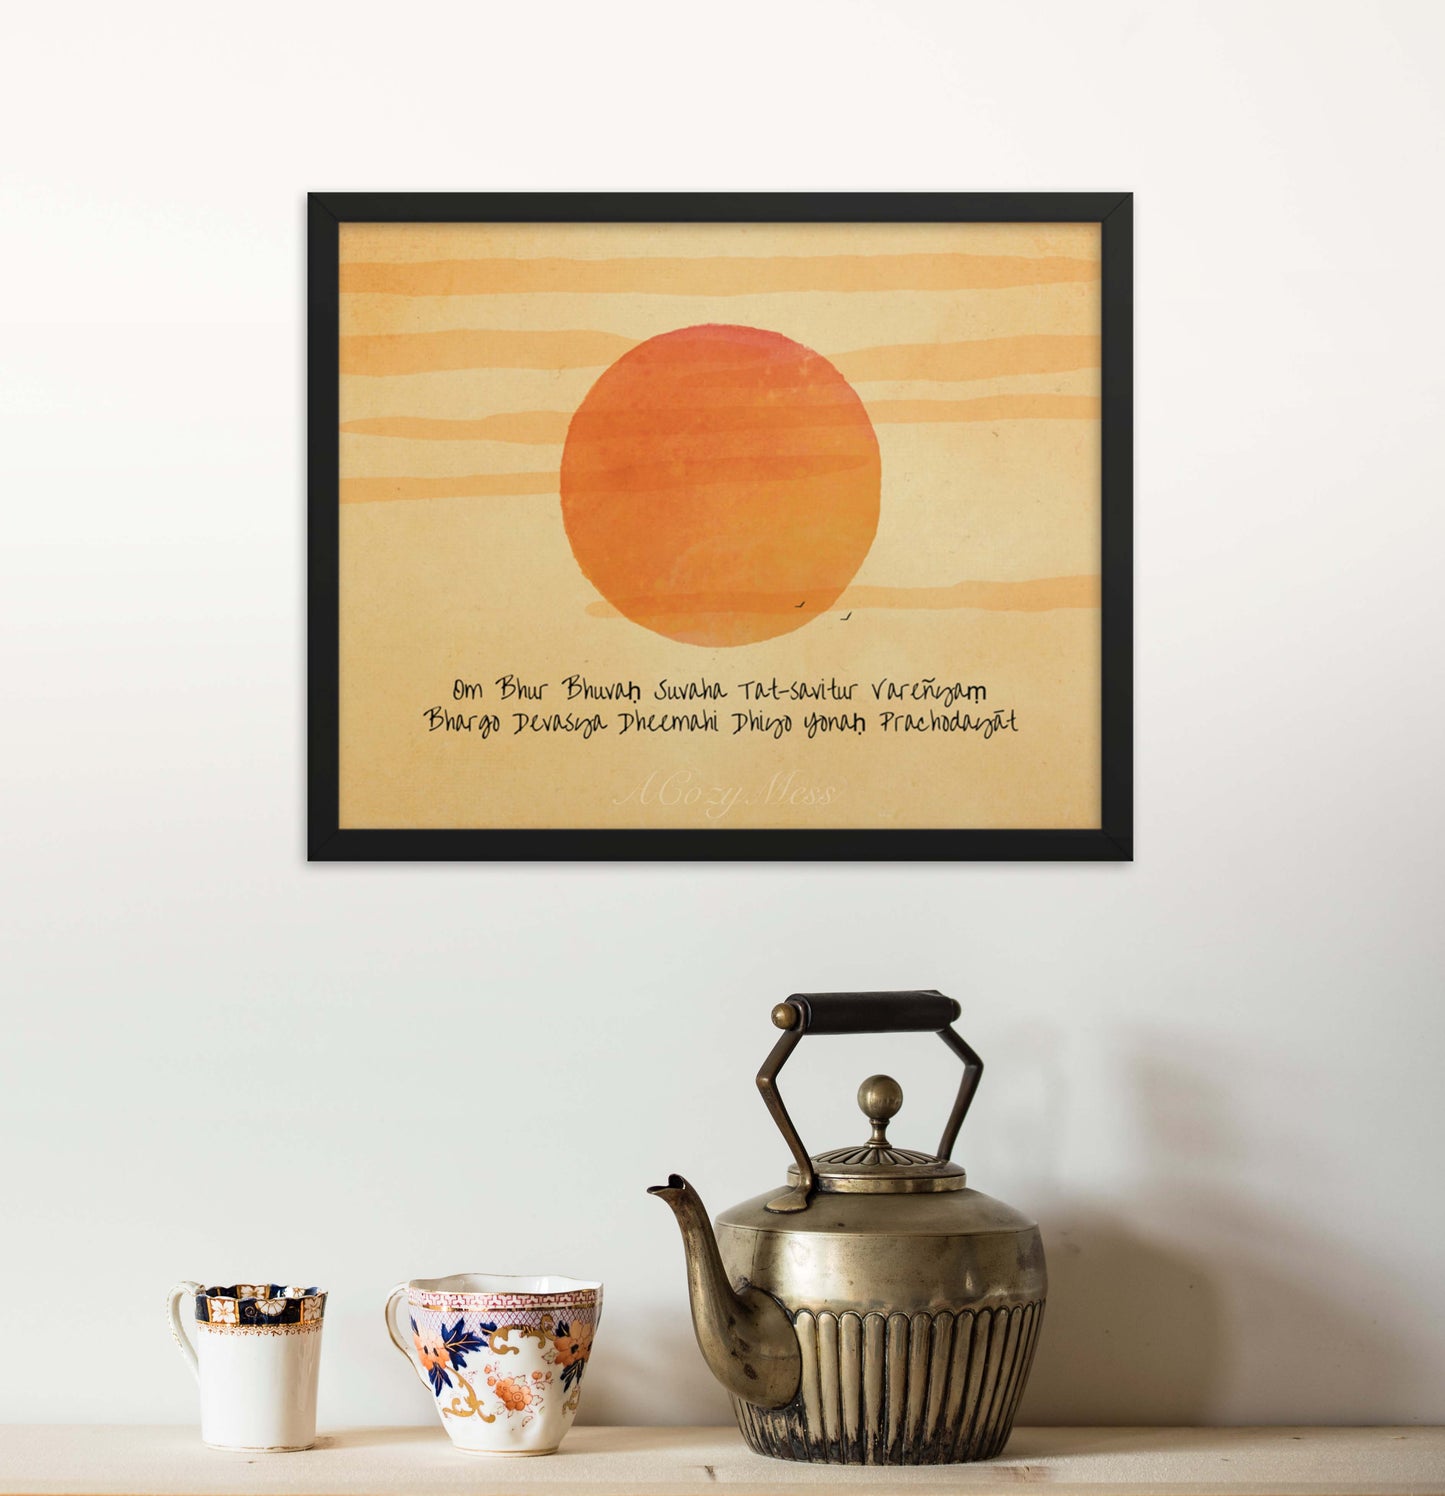 A wall art print featuring the Gayatri Mantra overlaid on a radiant sunburst, creating a spiritually uplifting and visually captivating artwork in black frame.